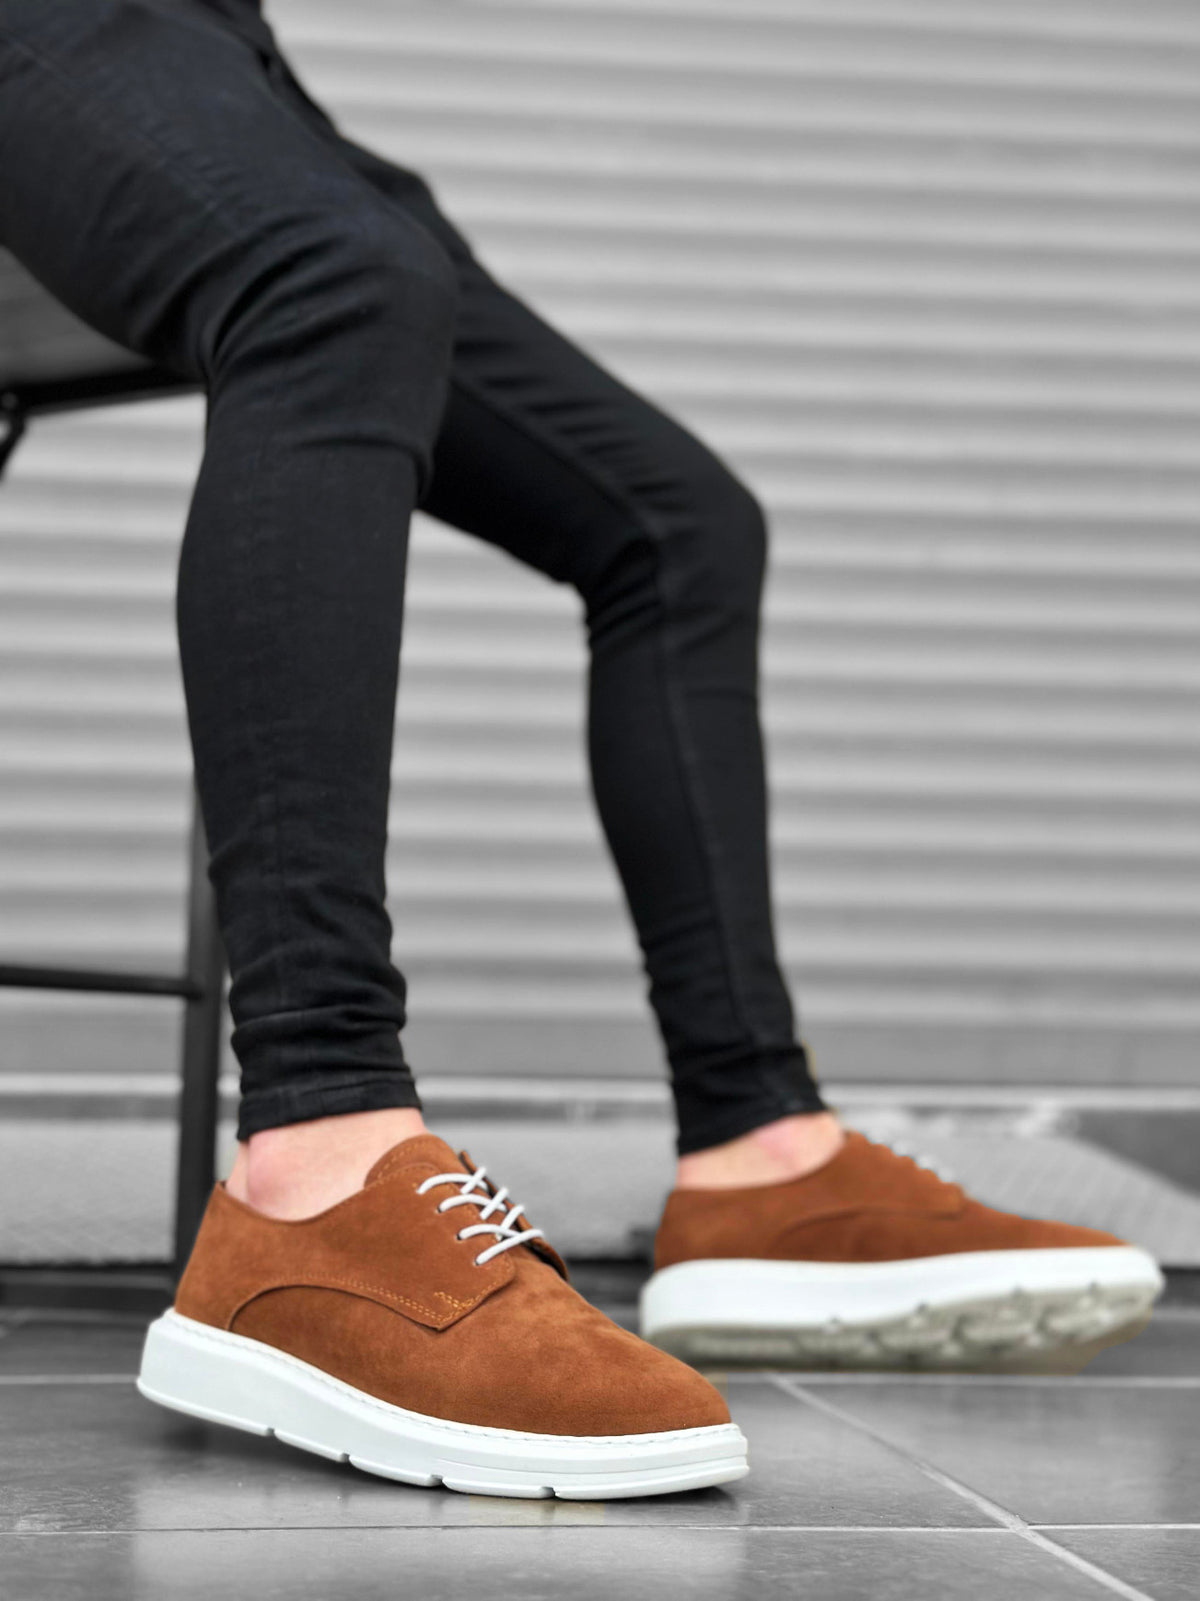 BA0003 Lace-Up Suede Classic Tan White High Sole Casual Men's Sneakers Shoes - STREET MODE ™